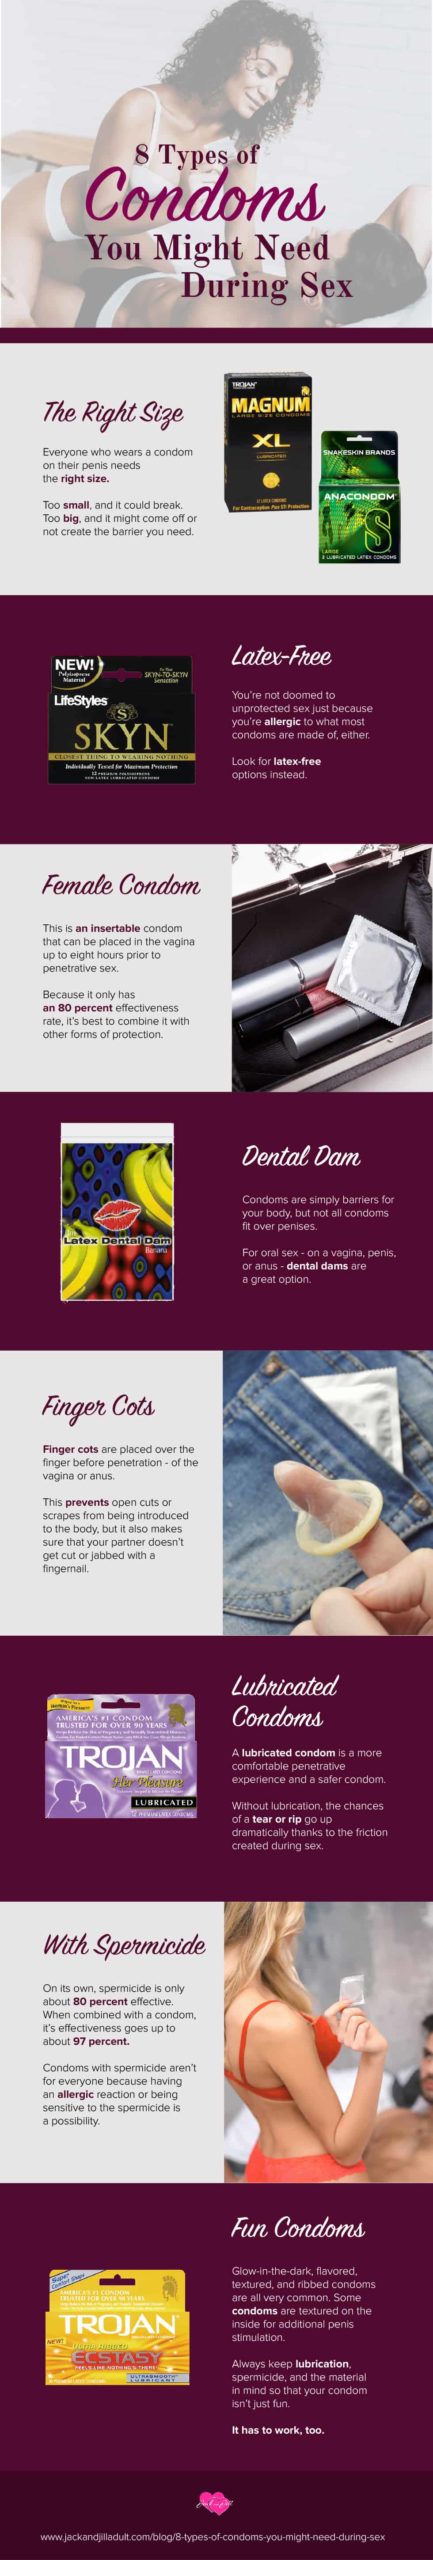 Infographic for 8 Types of Condoms You Might Need During Sex